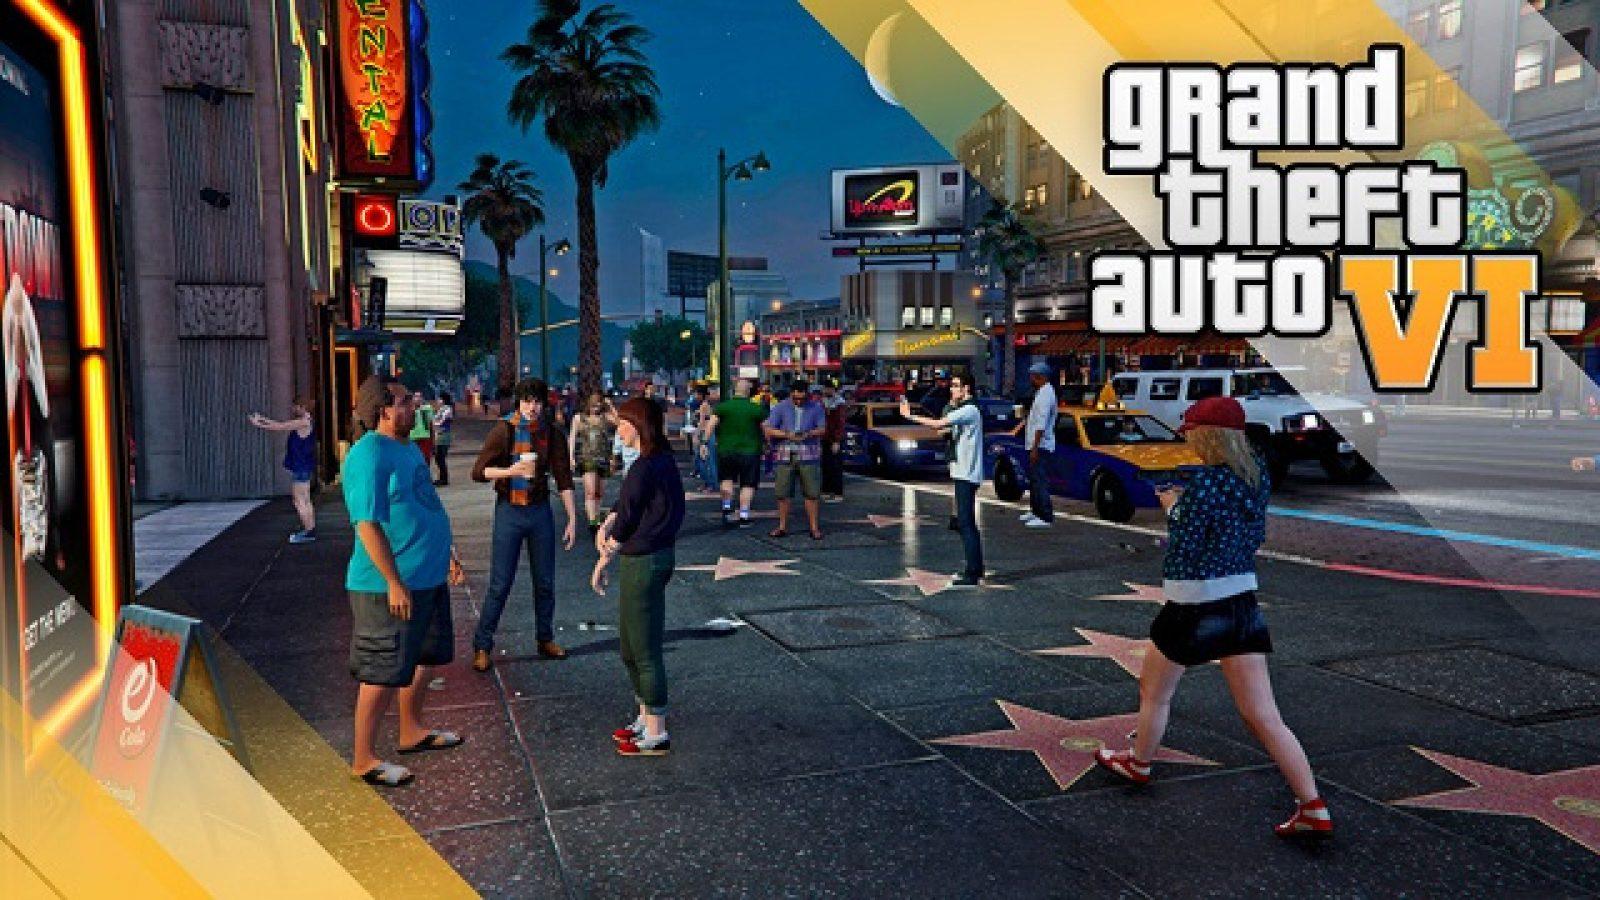 GTA 6 leak seems to confirm game is set in Vice City